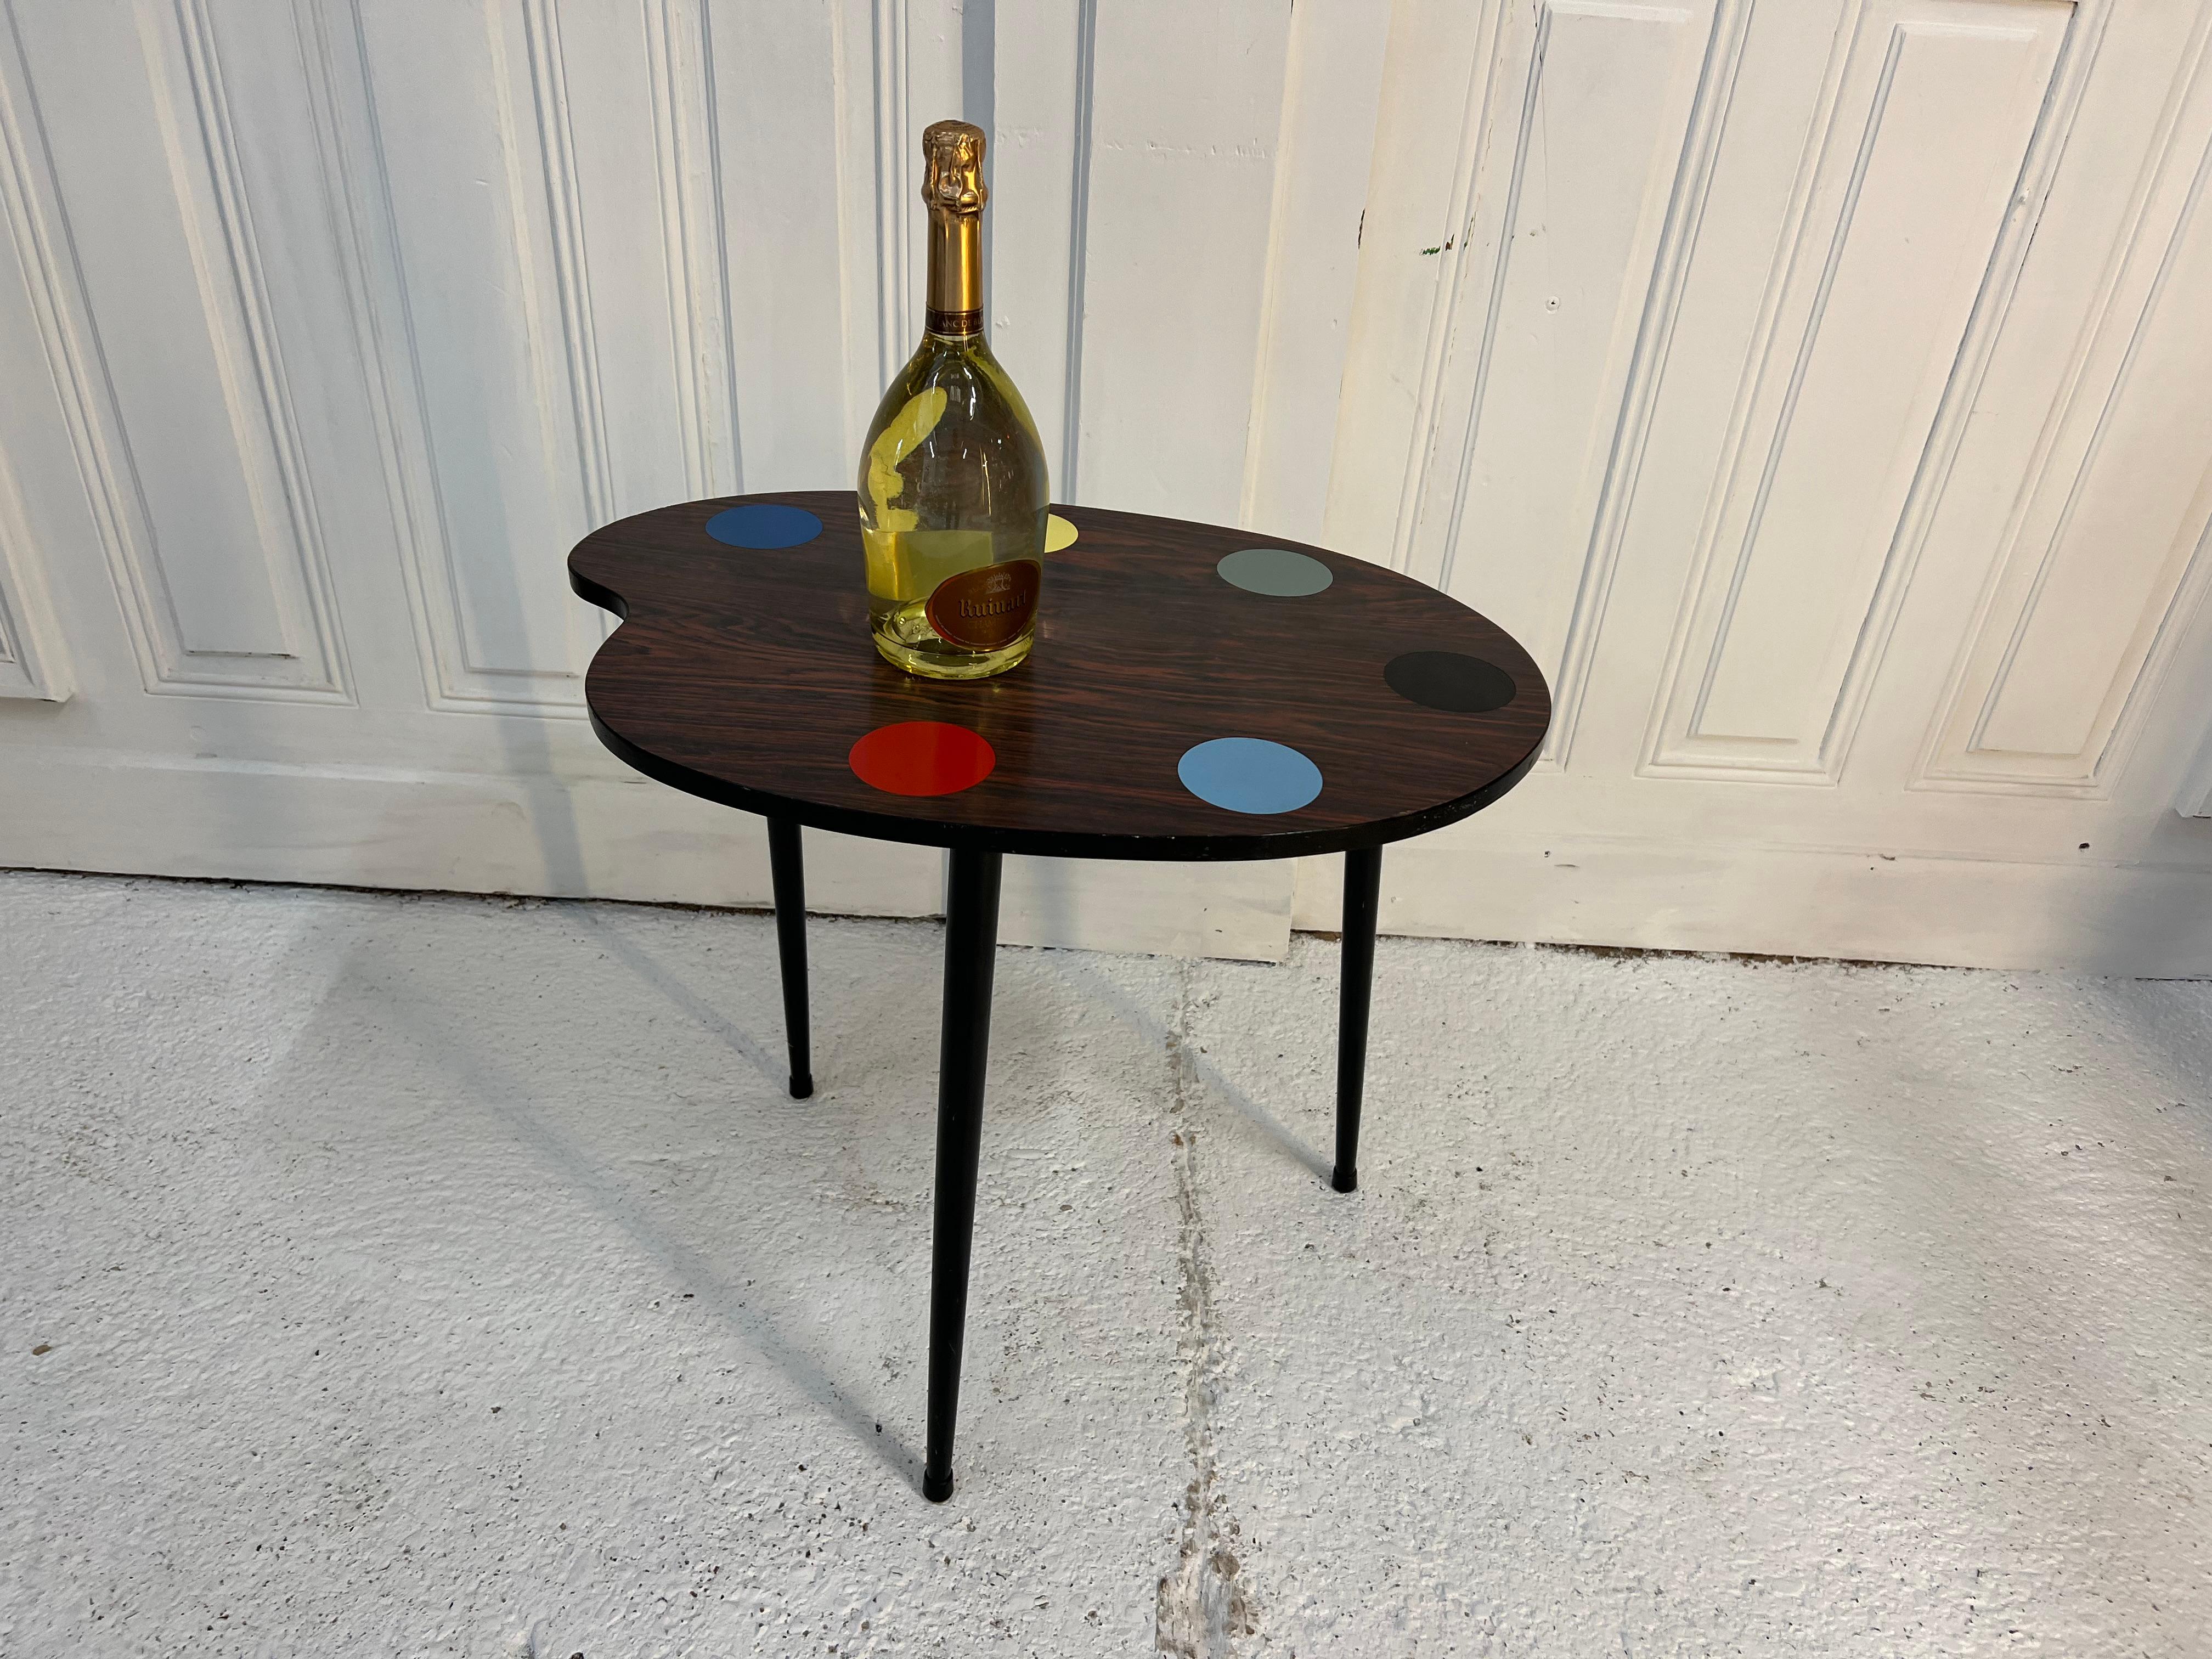 60s formica coffee table in the shape of a painter's palette
the slots for the glasses are differentiated by the colors
the feet are completely unscrewable for transport.